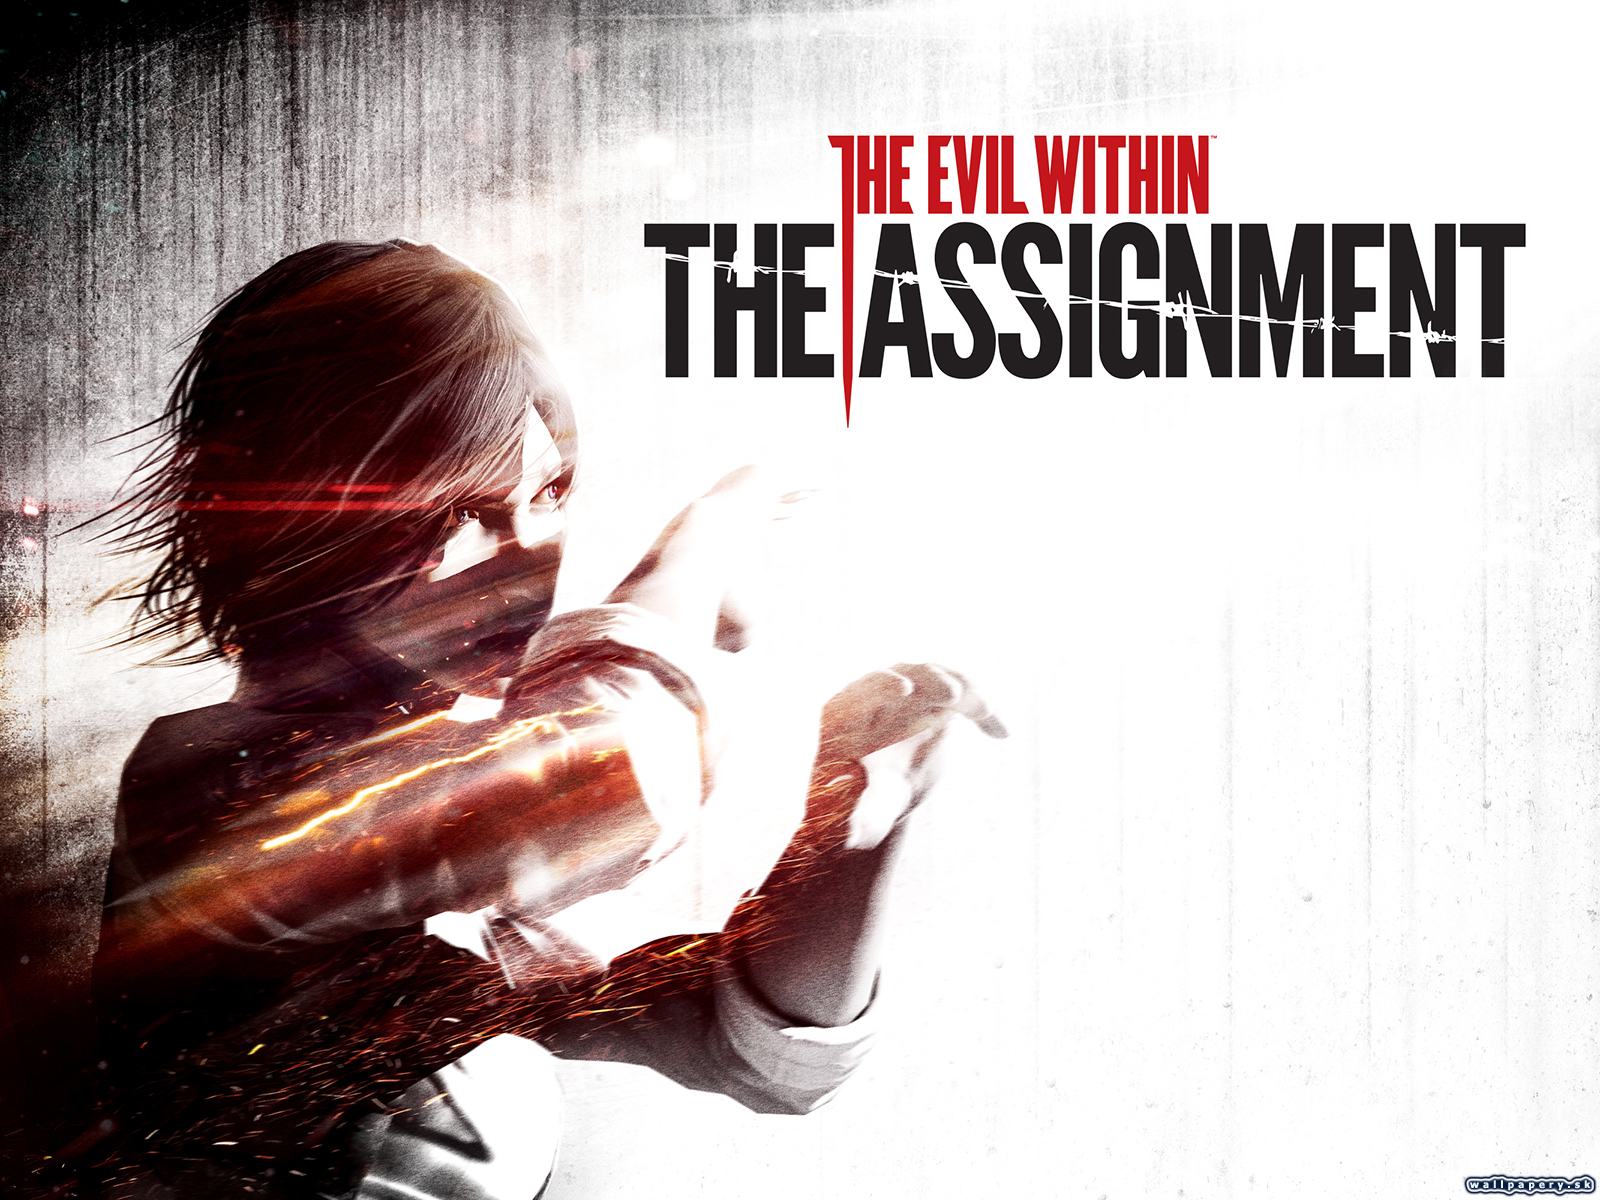 The Evil Within: The Assignment - wallpaper 1